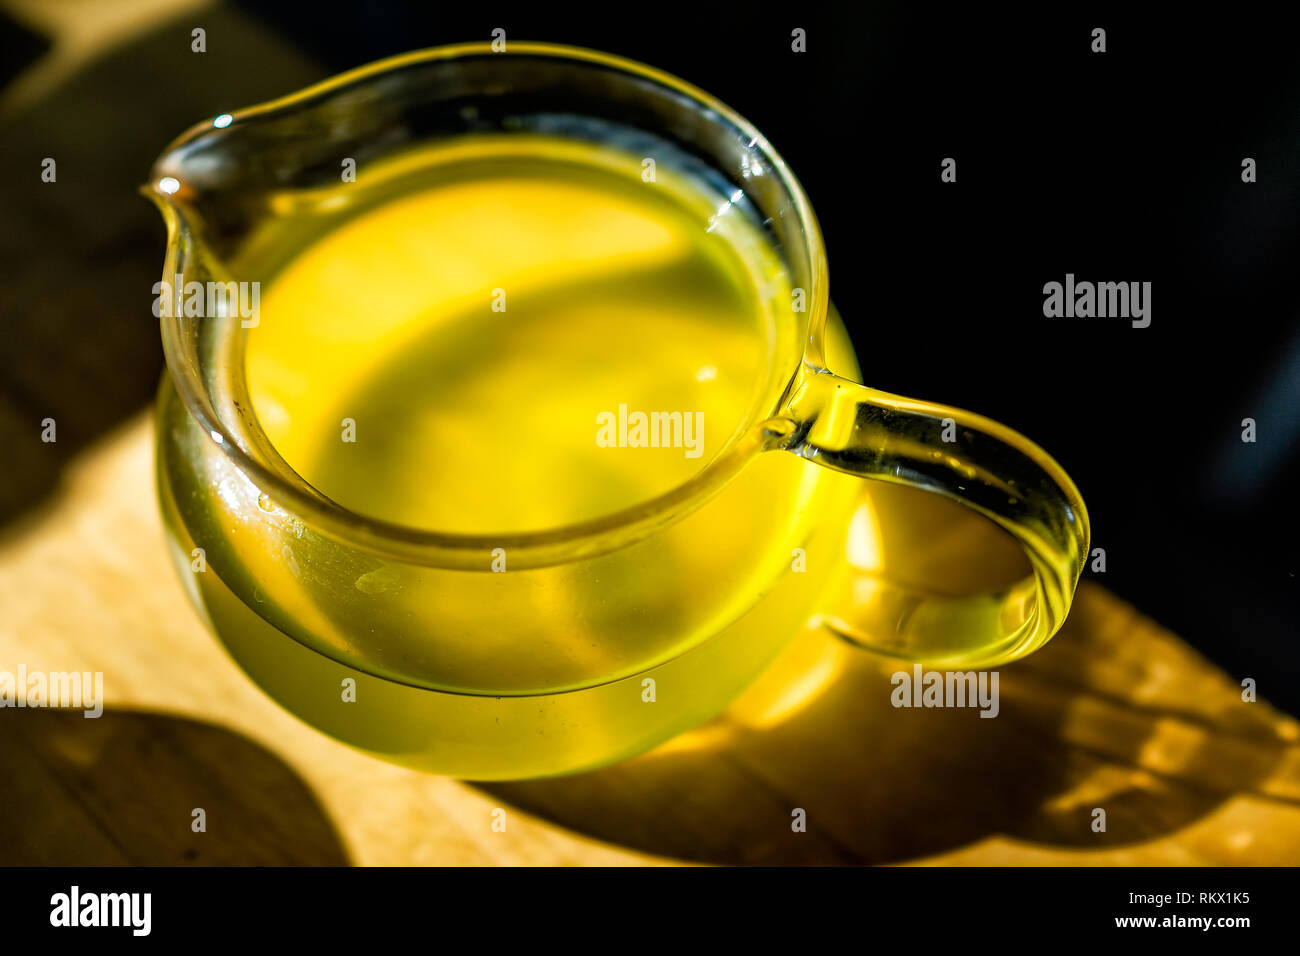 https://c8.alamy.com/comp/RKX1K5/closeup-of-glass-teapot-on-wooden-table-in-dark-room-with-sunlight-from-window-filled-with-japanese-green-or-oolong-yellow-tea-color-sencha-RKX1K5.jpg